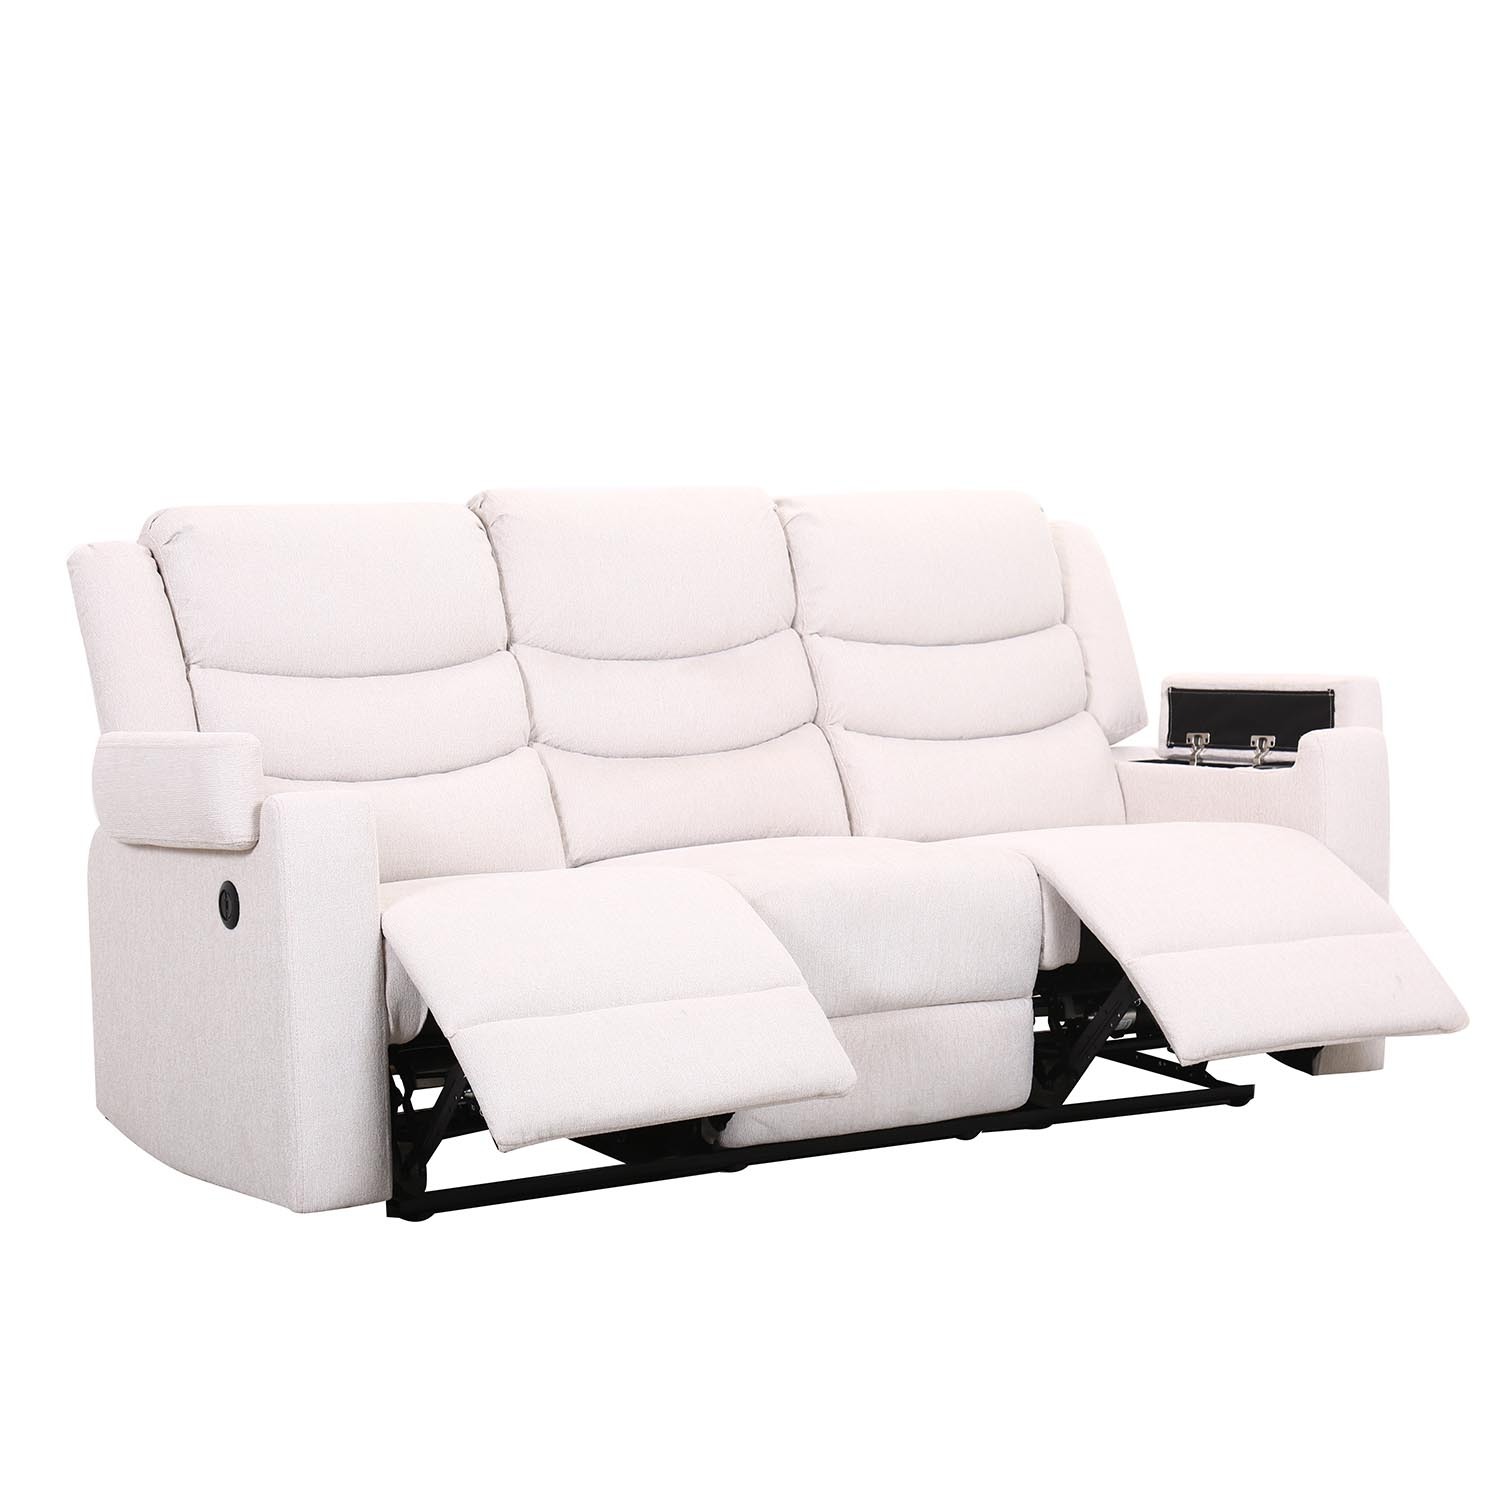 Heritage 3 Seater Ivory Recliner Sofa Image 4